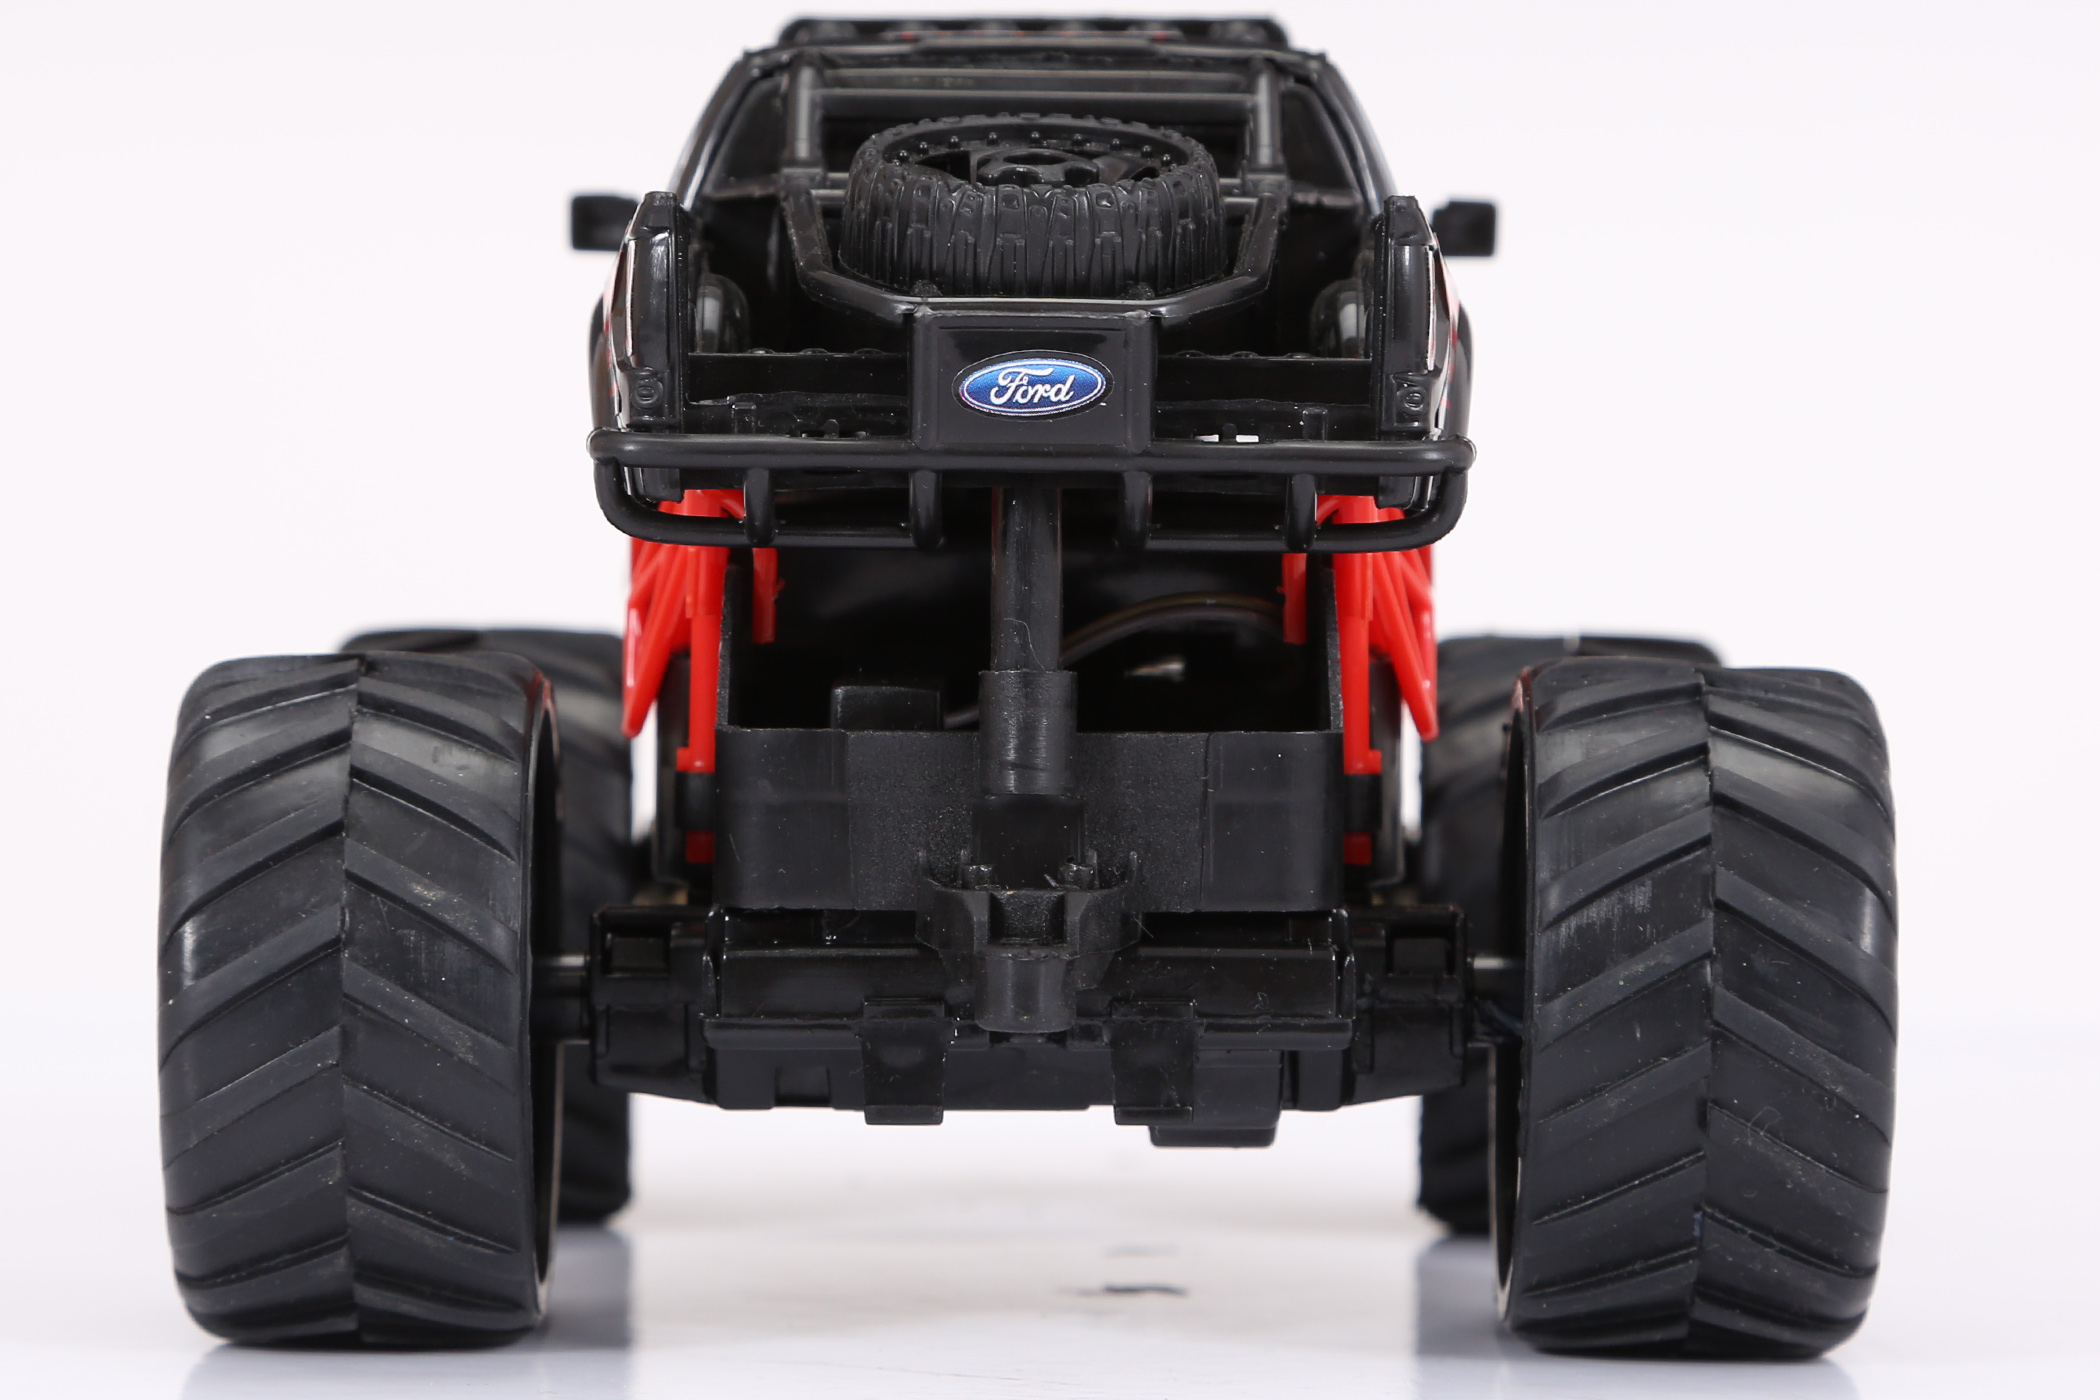 New Bright (1:24) Ford Raptor Battery Remote Control Black Truck, 2424-4K2 - image 9 of 9